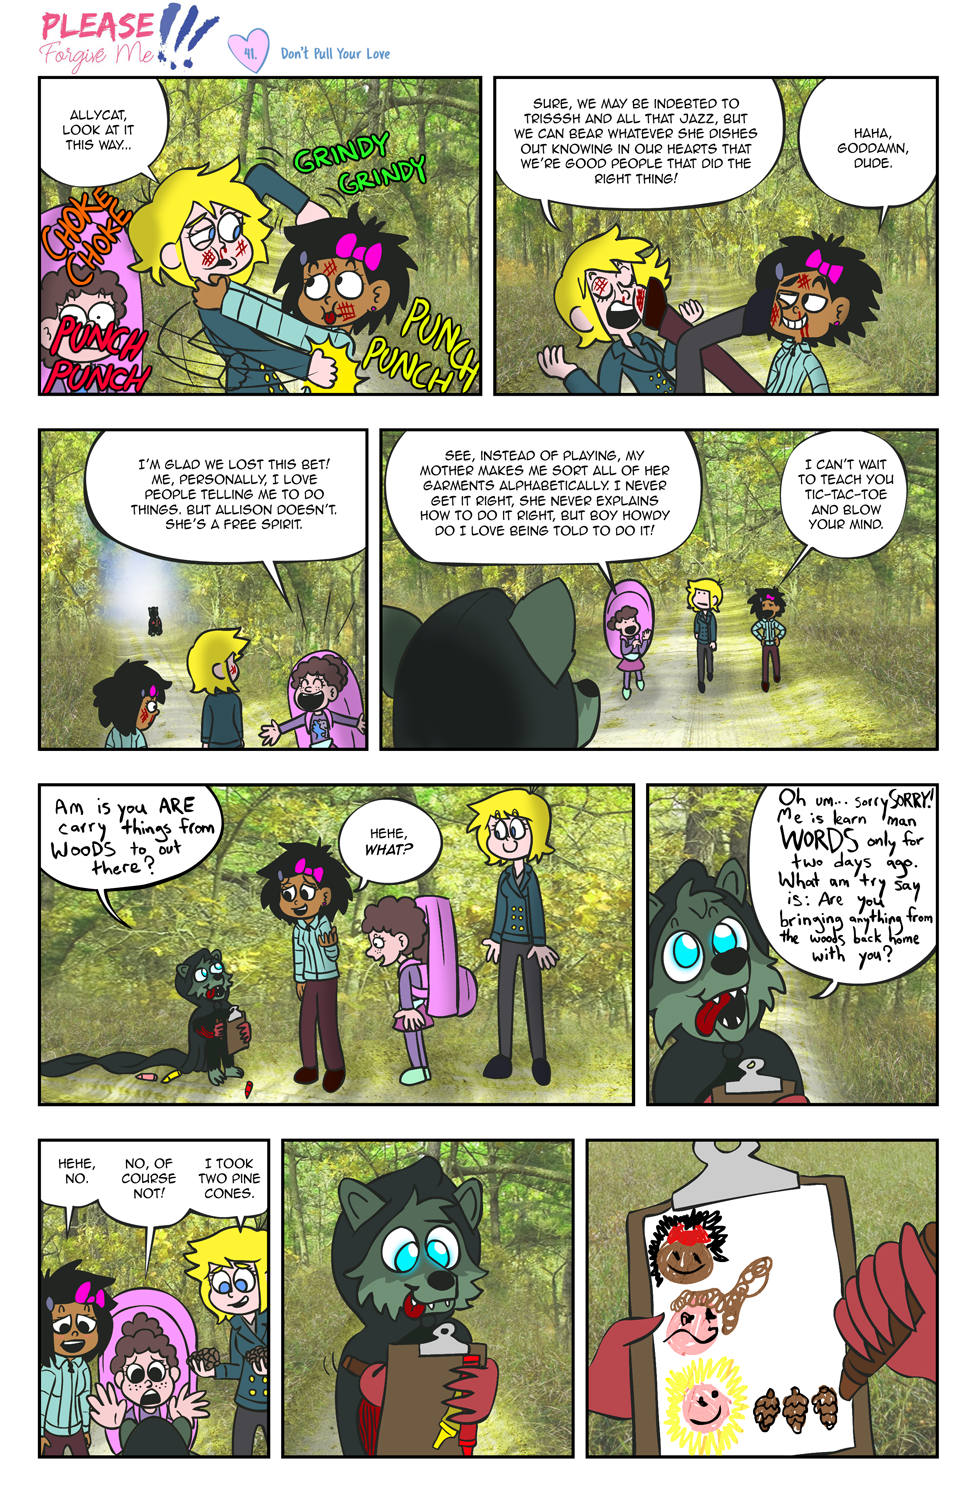 041: Don’t Pull Your Love – Page 1/5